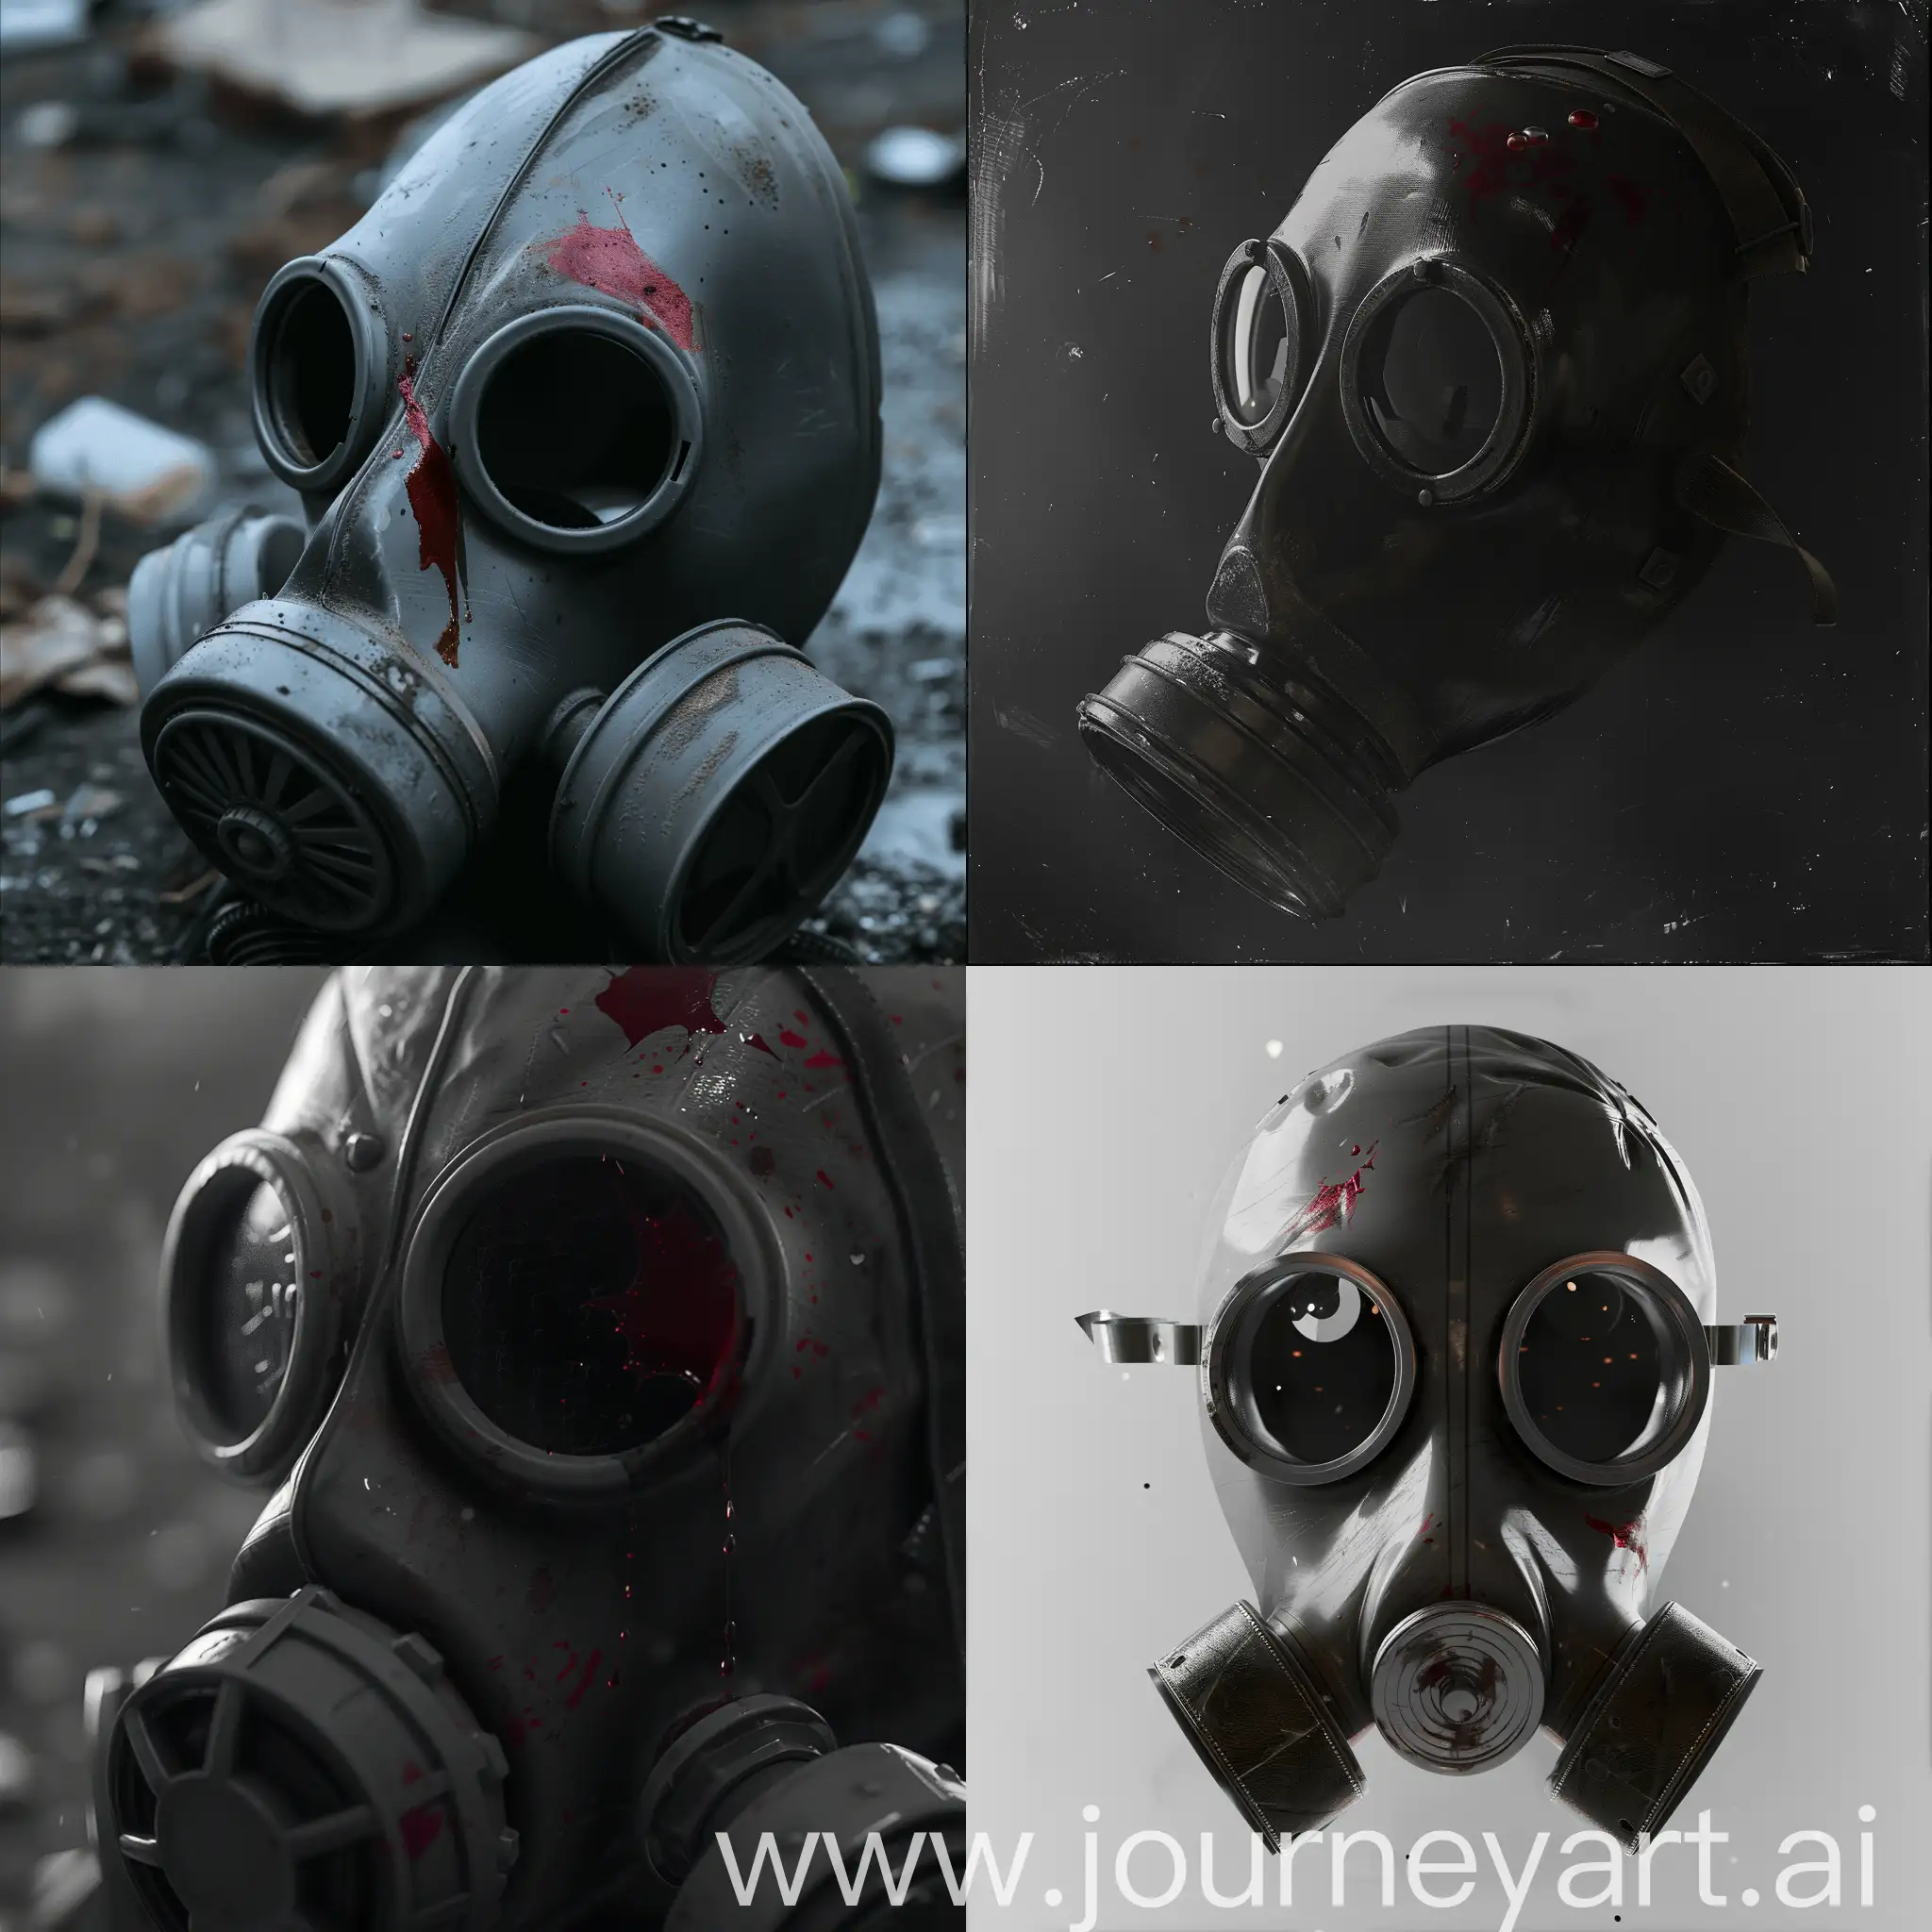 A gask mask in a dystopian universe gray scale. a glint or drop of red blood on one lense